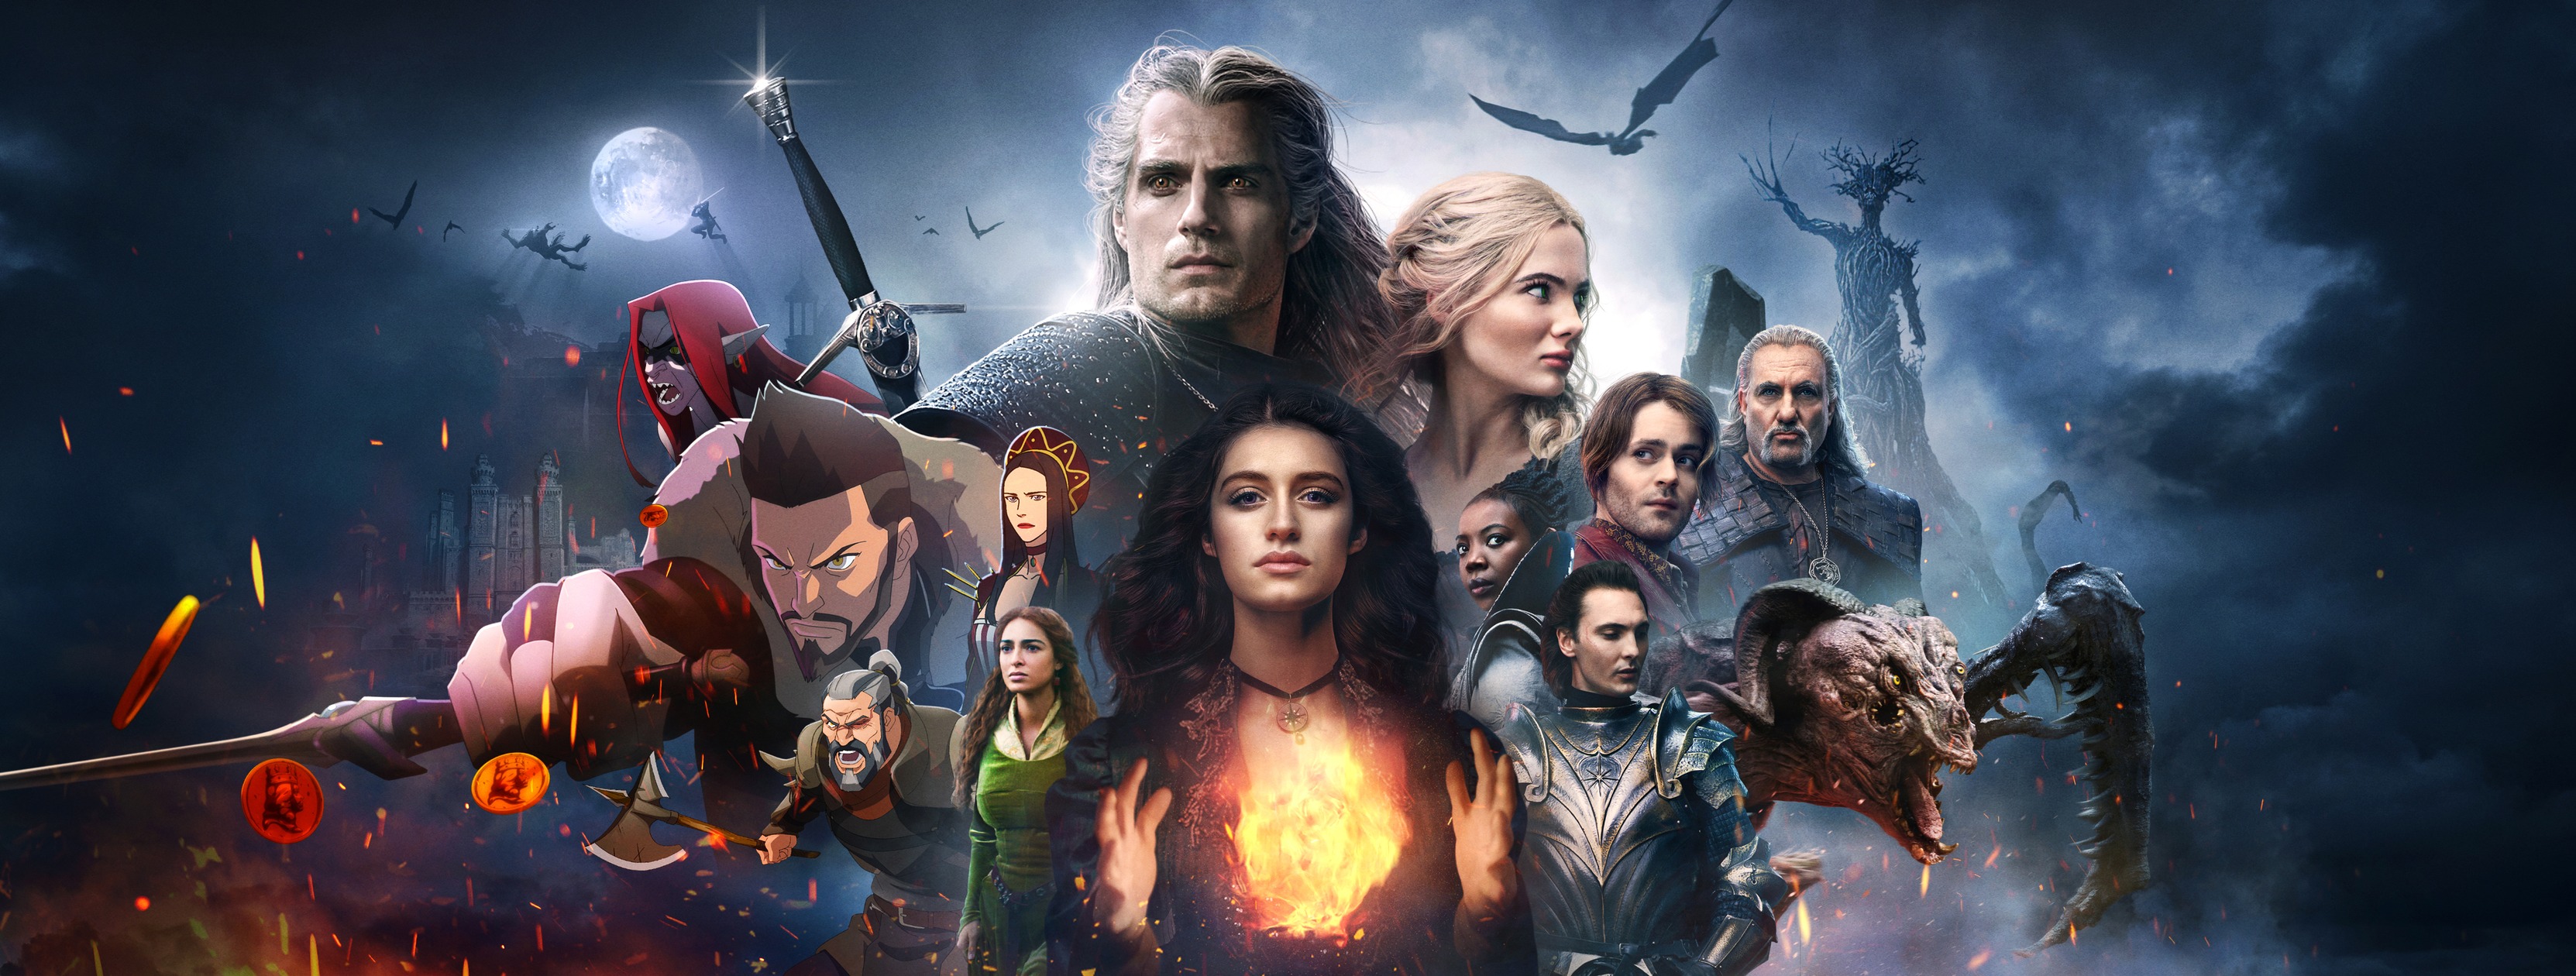 The Witcher TV Series Netflix TV Series The Witcher Nightmare Of The Wolf Geralt Of Rivia Ultrawide  3325x1260